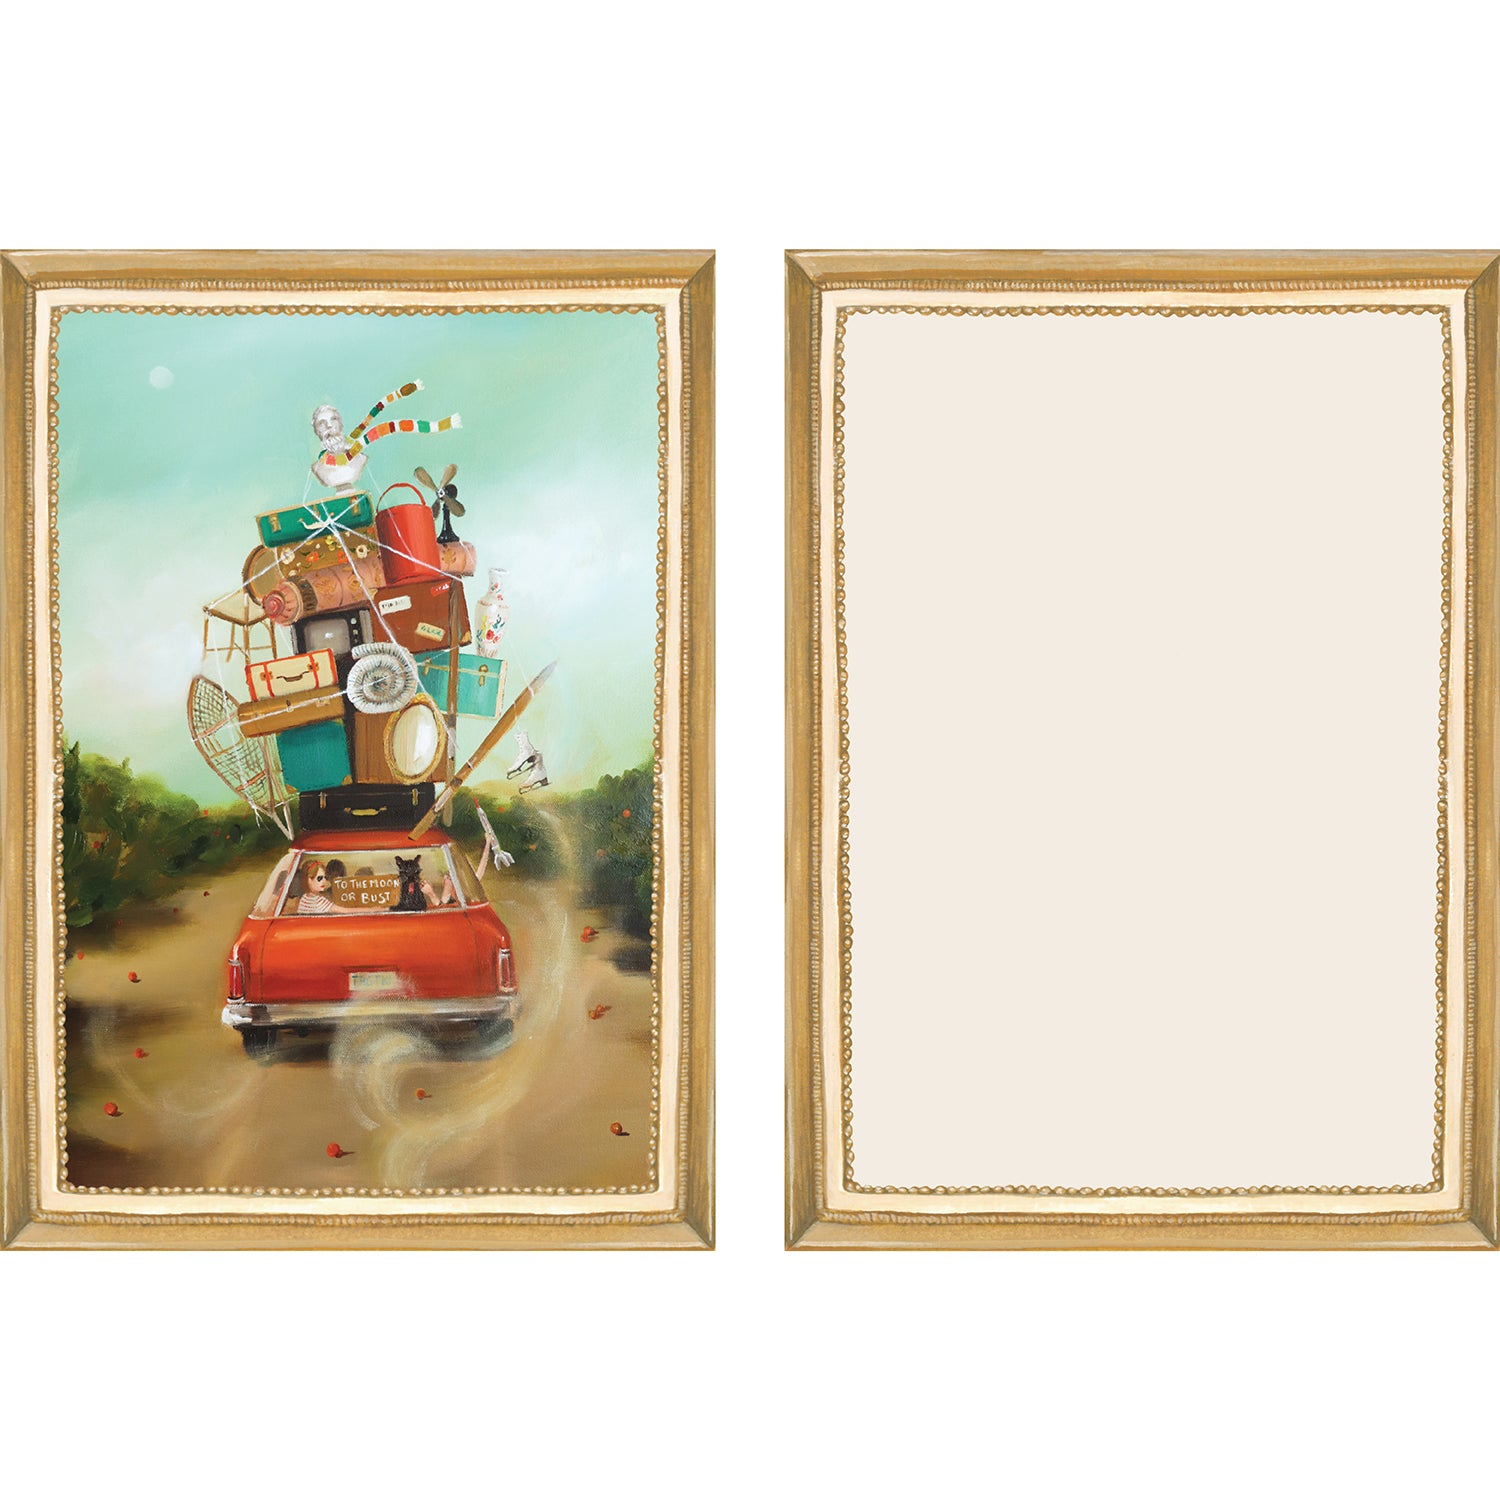 The illustrated front and blank back of a Flat Note, both sides framed in gold, featuring a painterly illustration of a vintage red car driving away from view, loaded high with suitcases and various recreational gear.